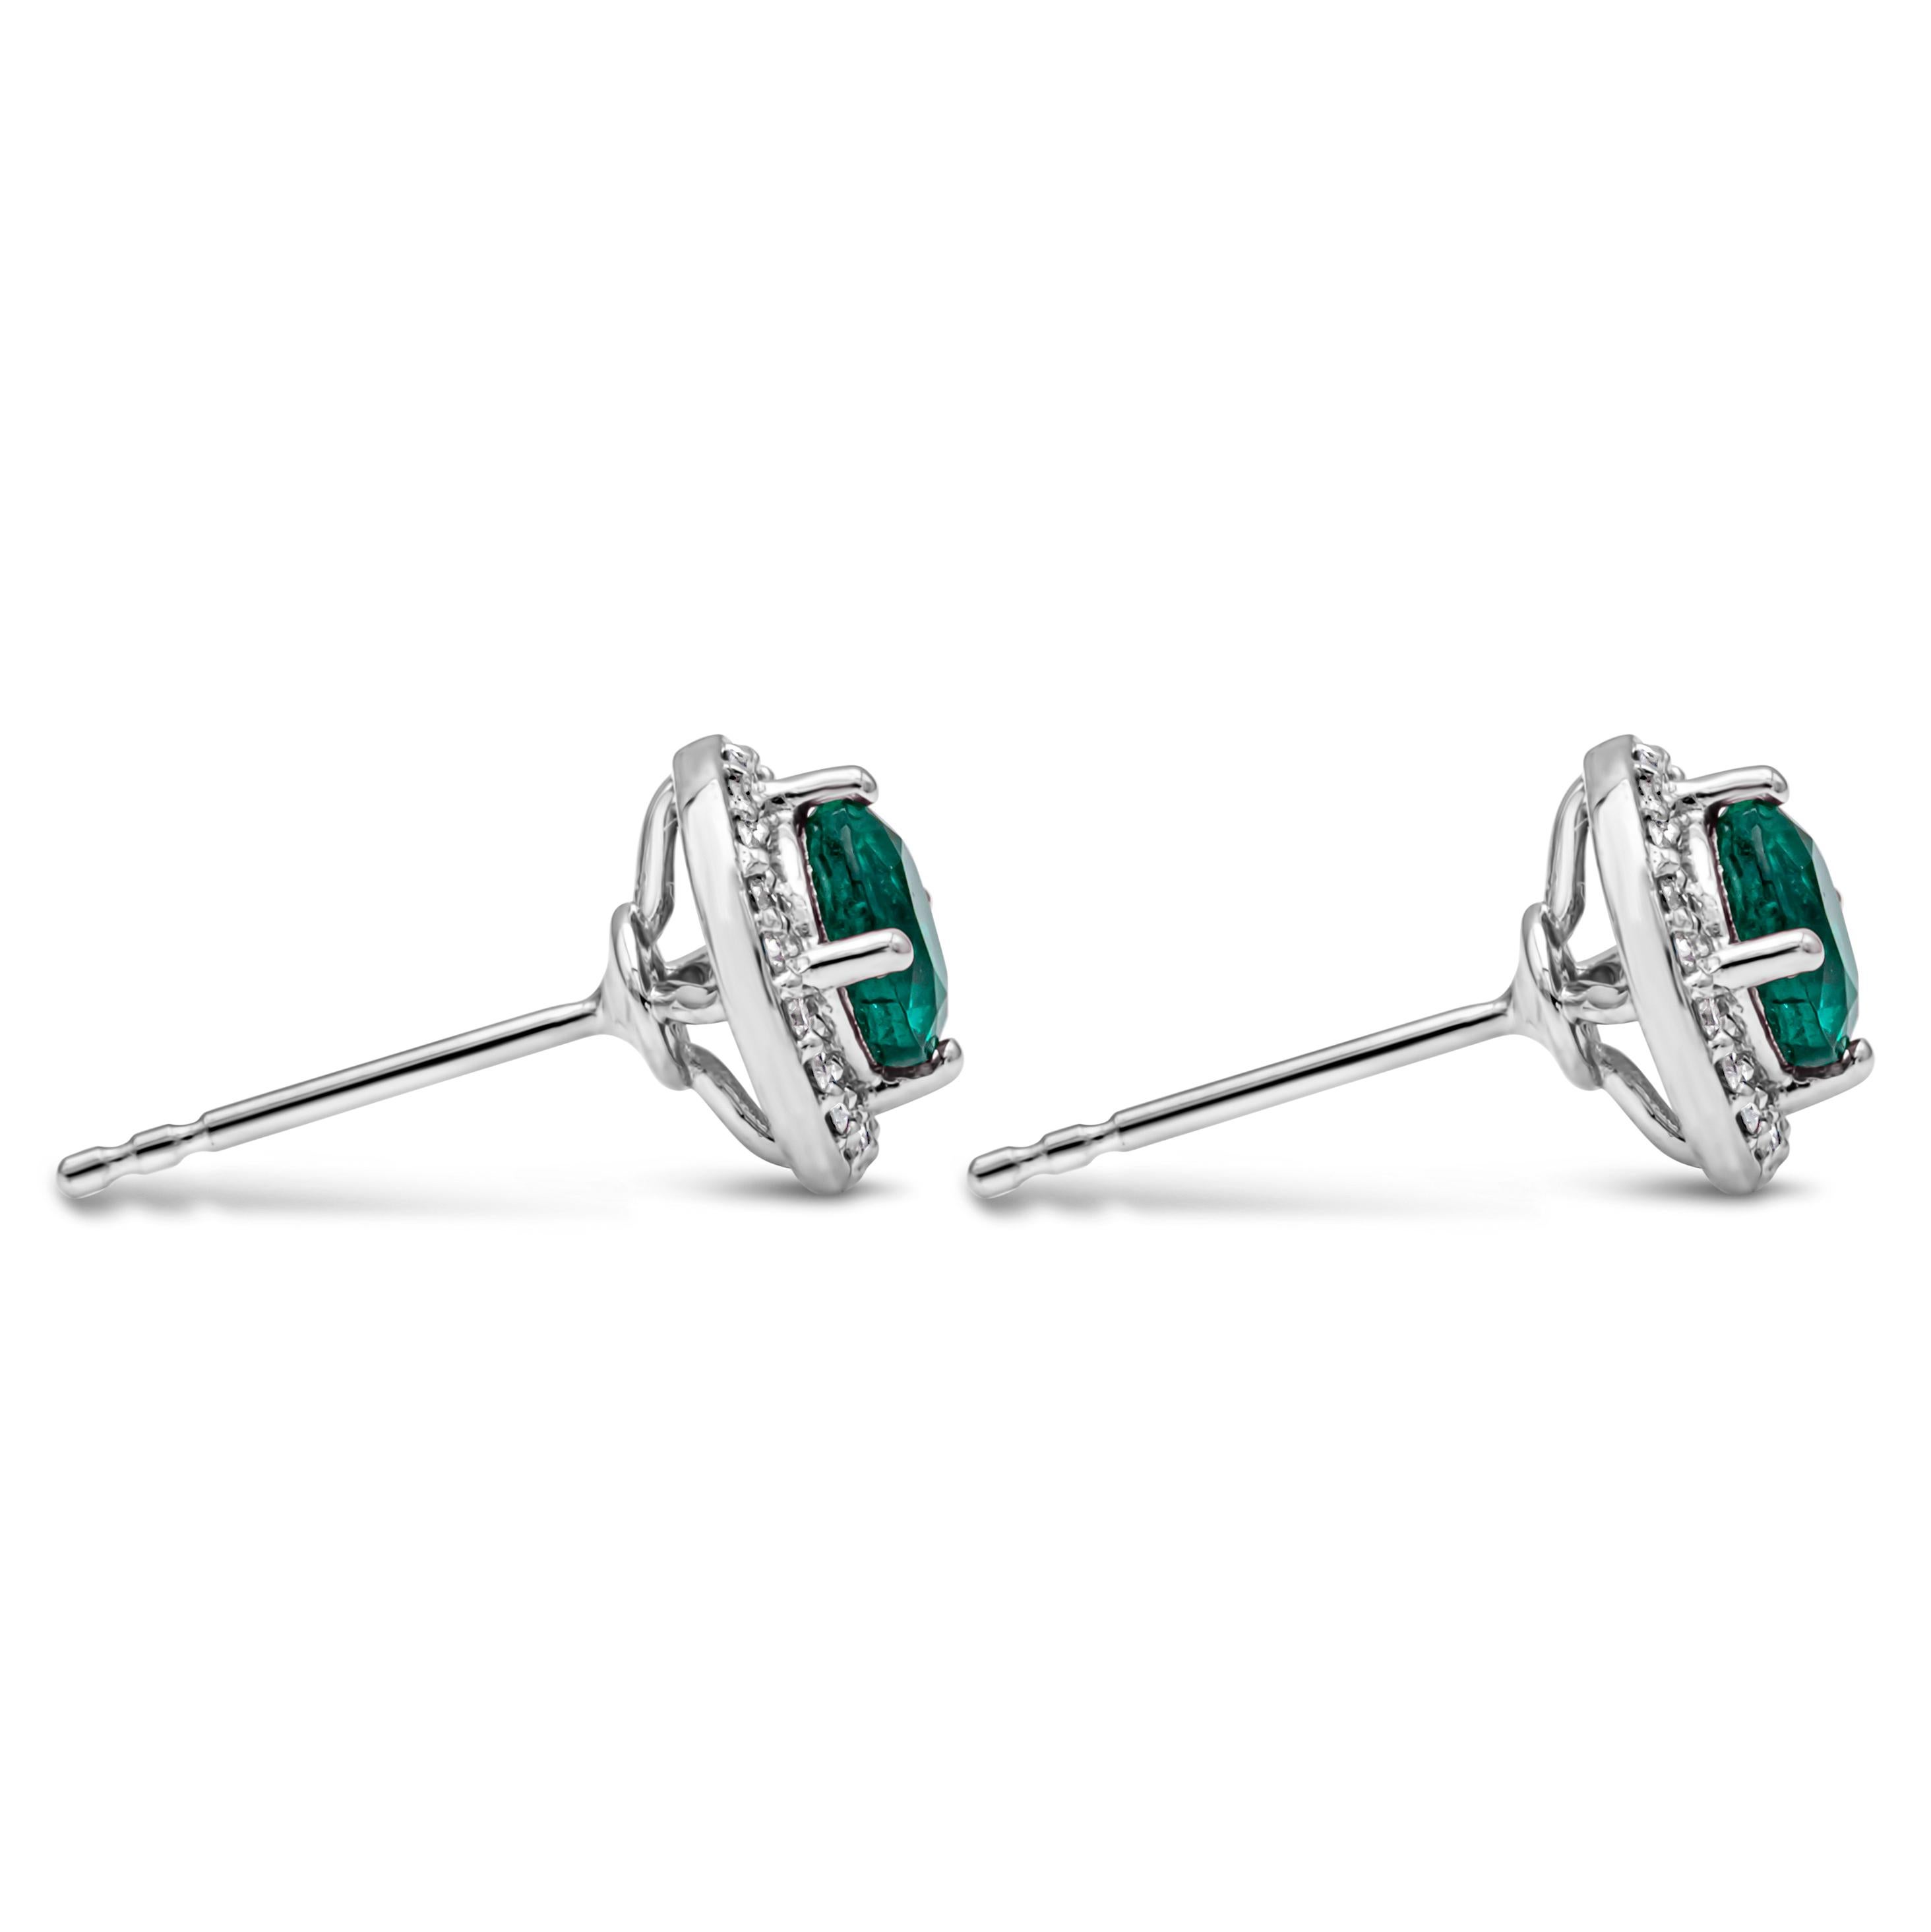 Contemporary 1.20 Carats Total Round Cut Green Emerald and Diamond Halo Stud Earrings For Sale